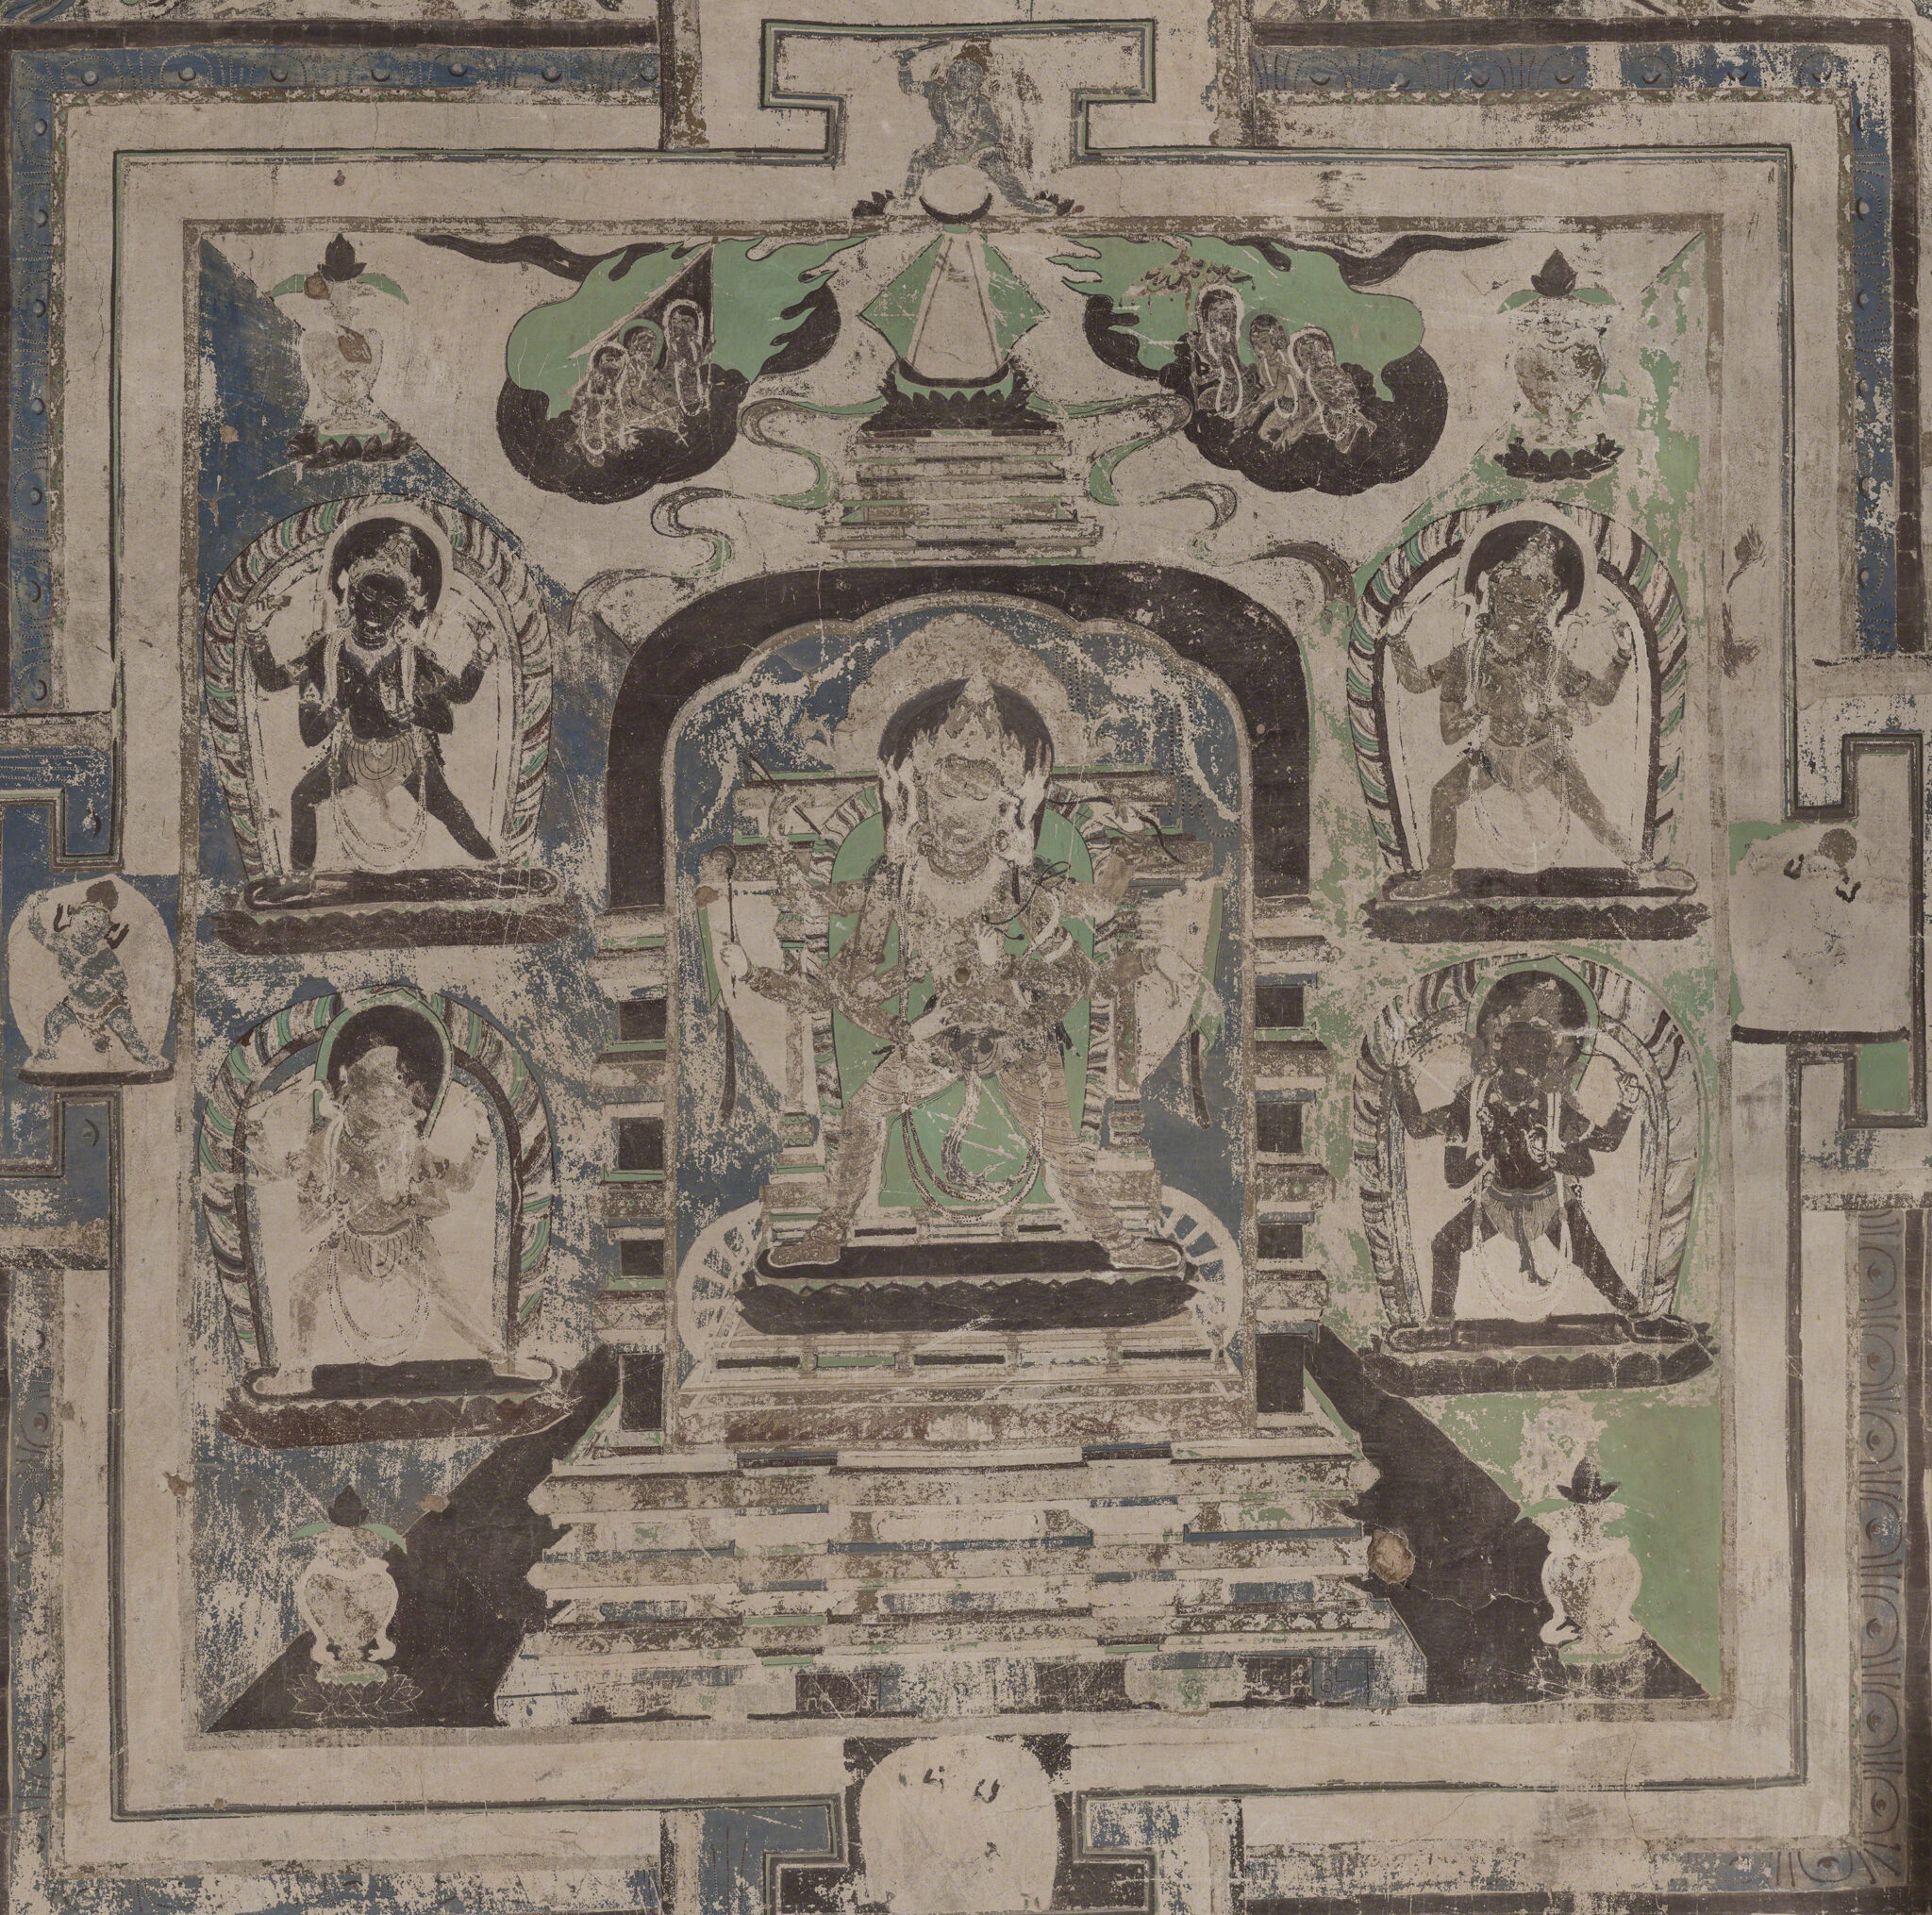 Central deity and four smaller deities positioned within square enclosures, depicted in green, blue, and black